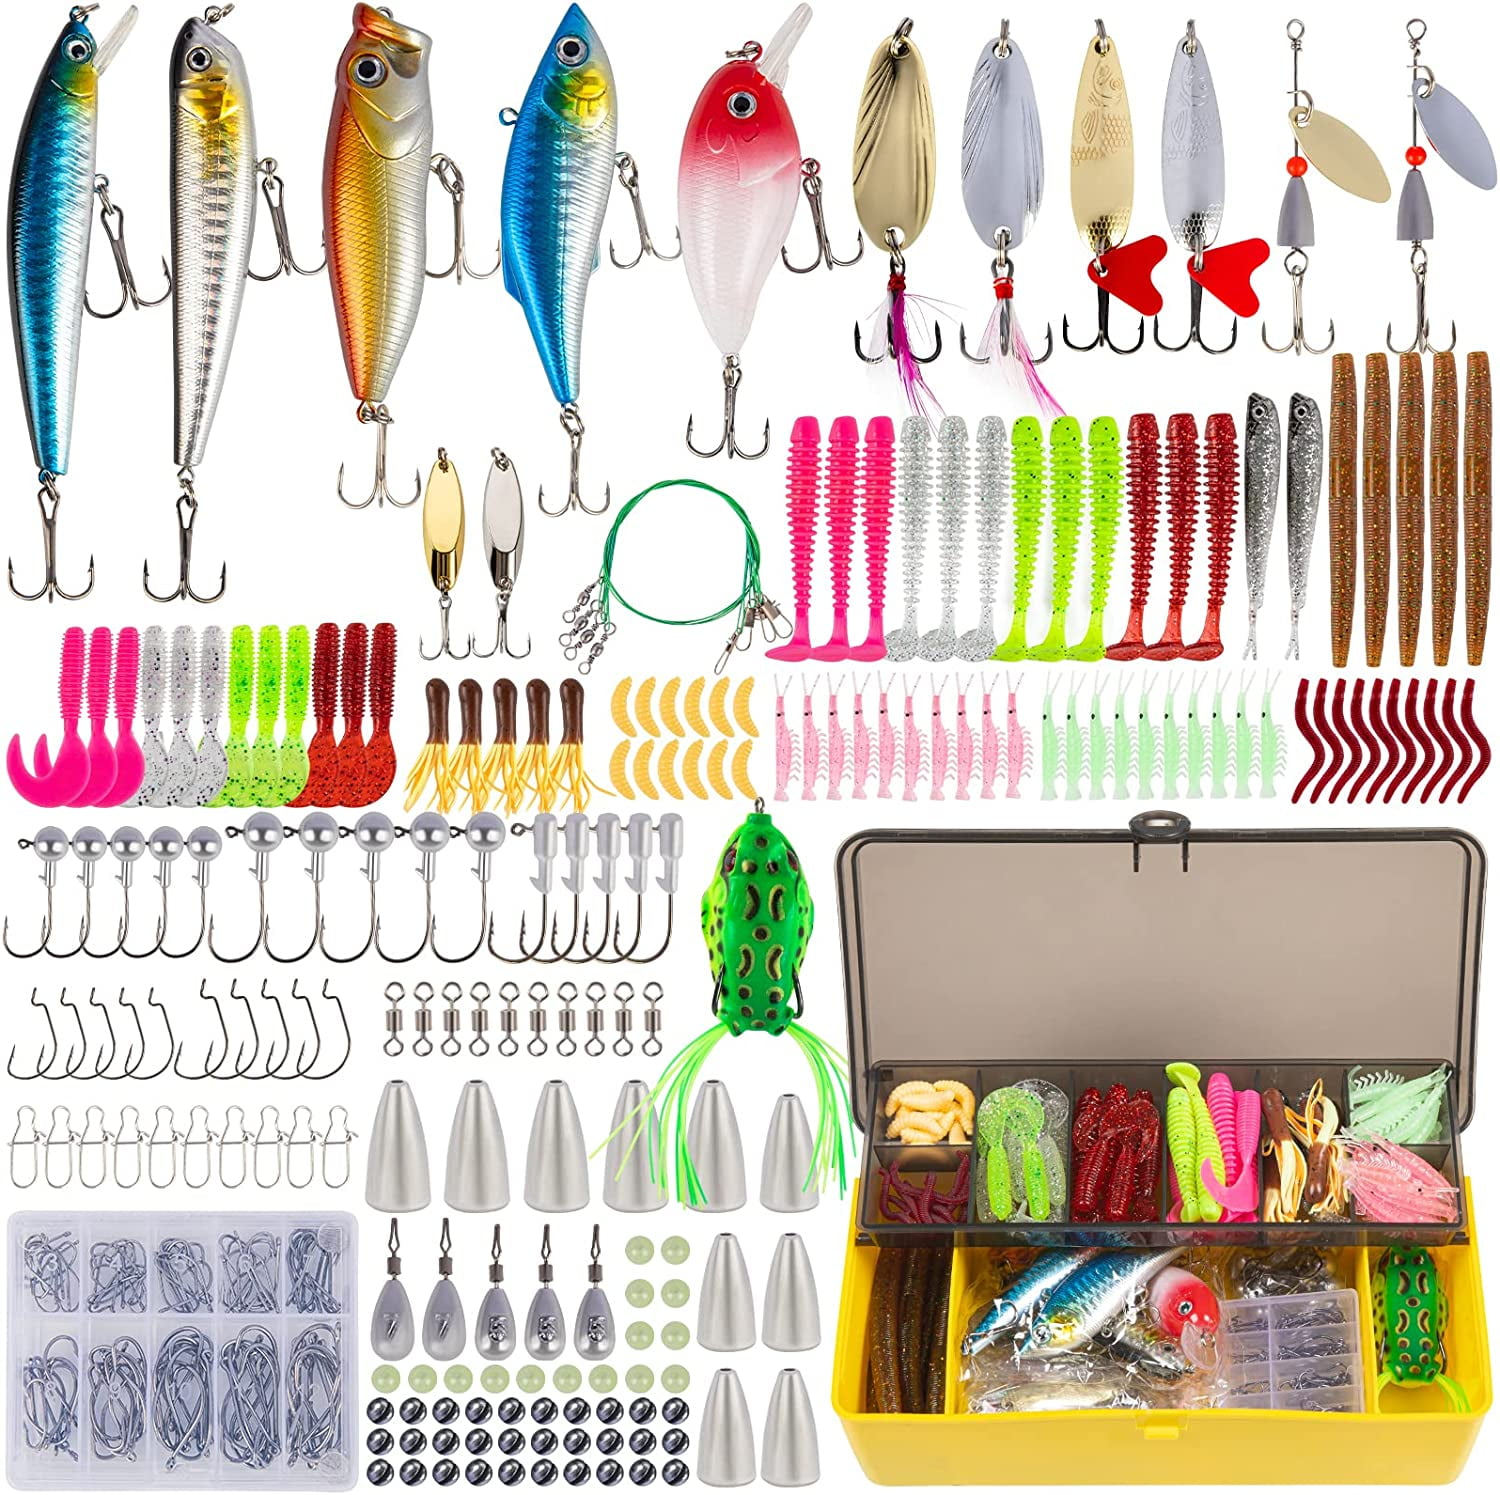 Fancyes Fishing Kit Set with Tackle Box Fishing Gear Equipment for  Freshwater Trout Bass Salmon Fishing Baits Kit Including Frog Spoon  CrankBait Jigs